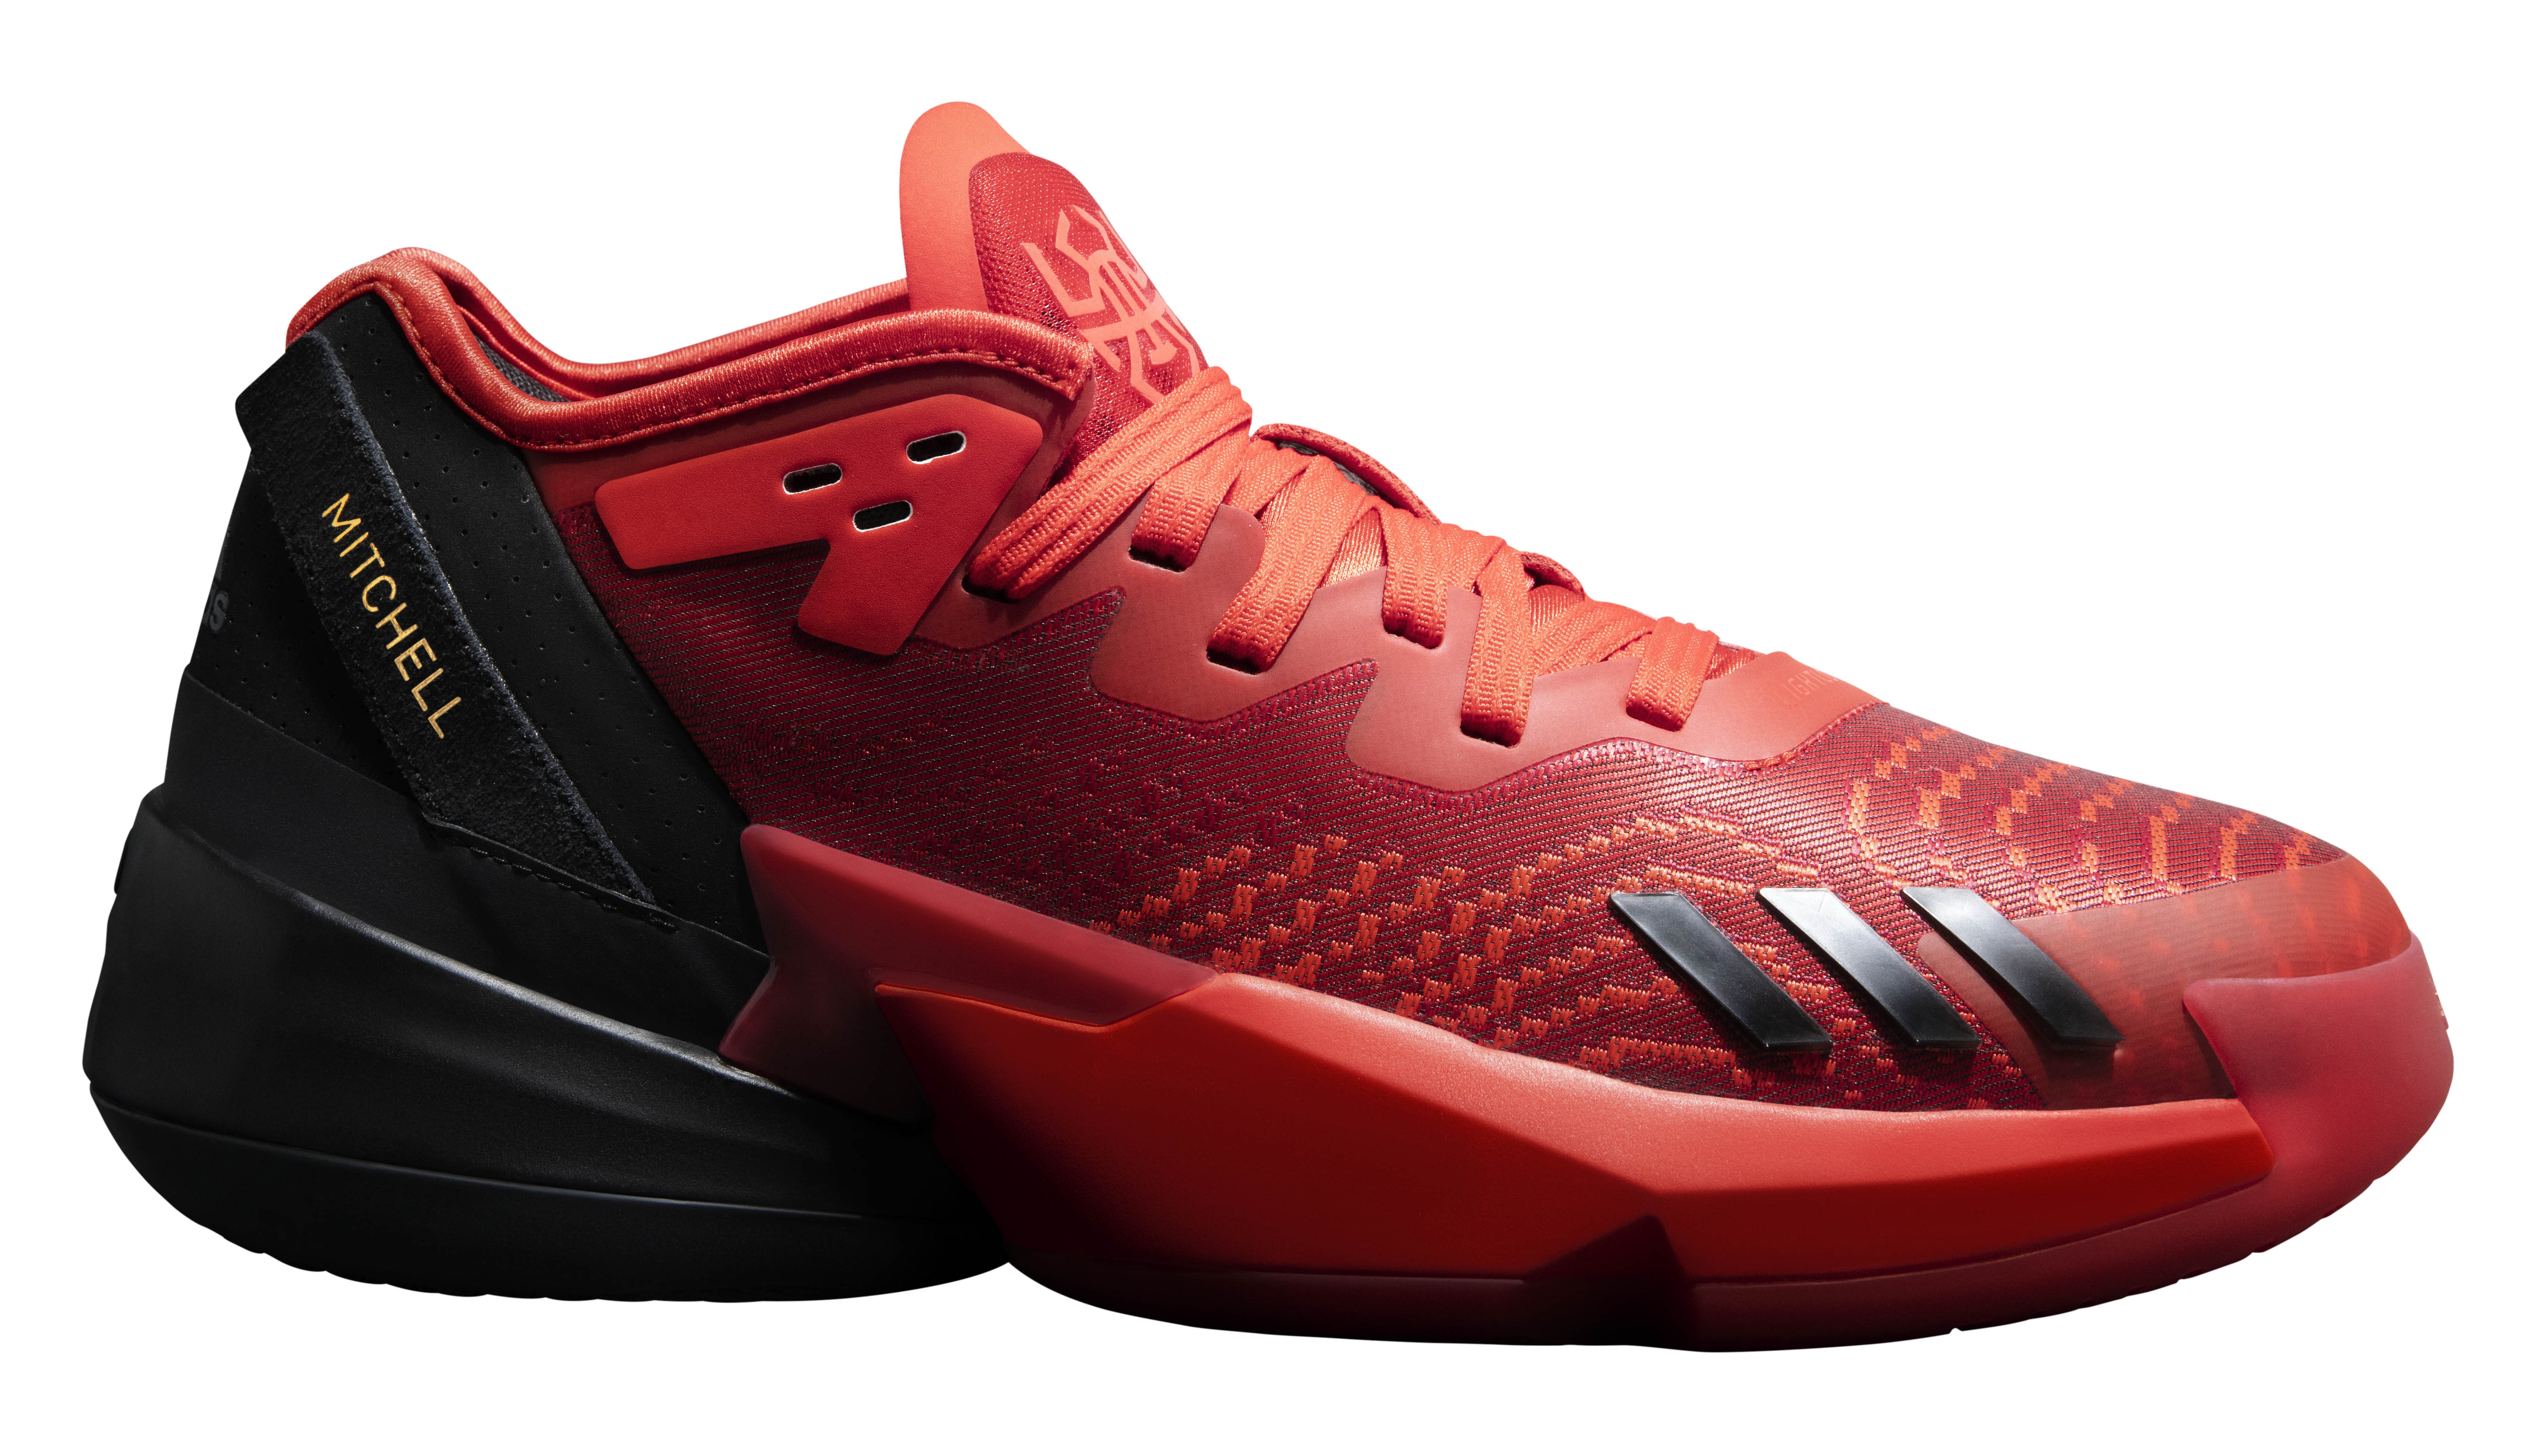 Louisville Cardinals adidas D.O.N. Issue 2 Shoes - Black/Red